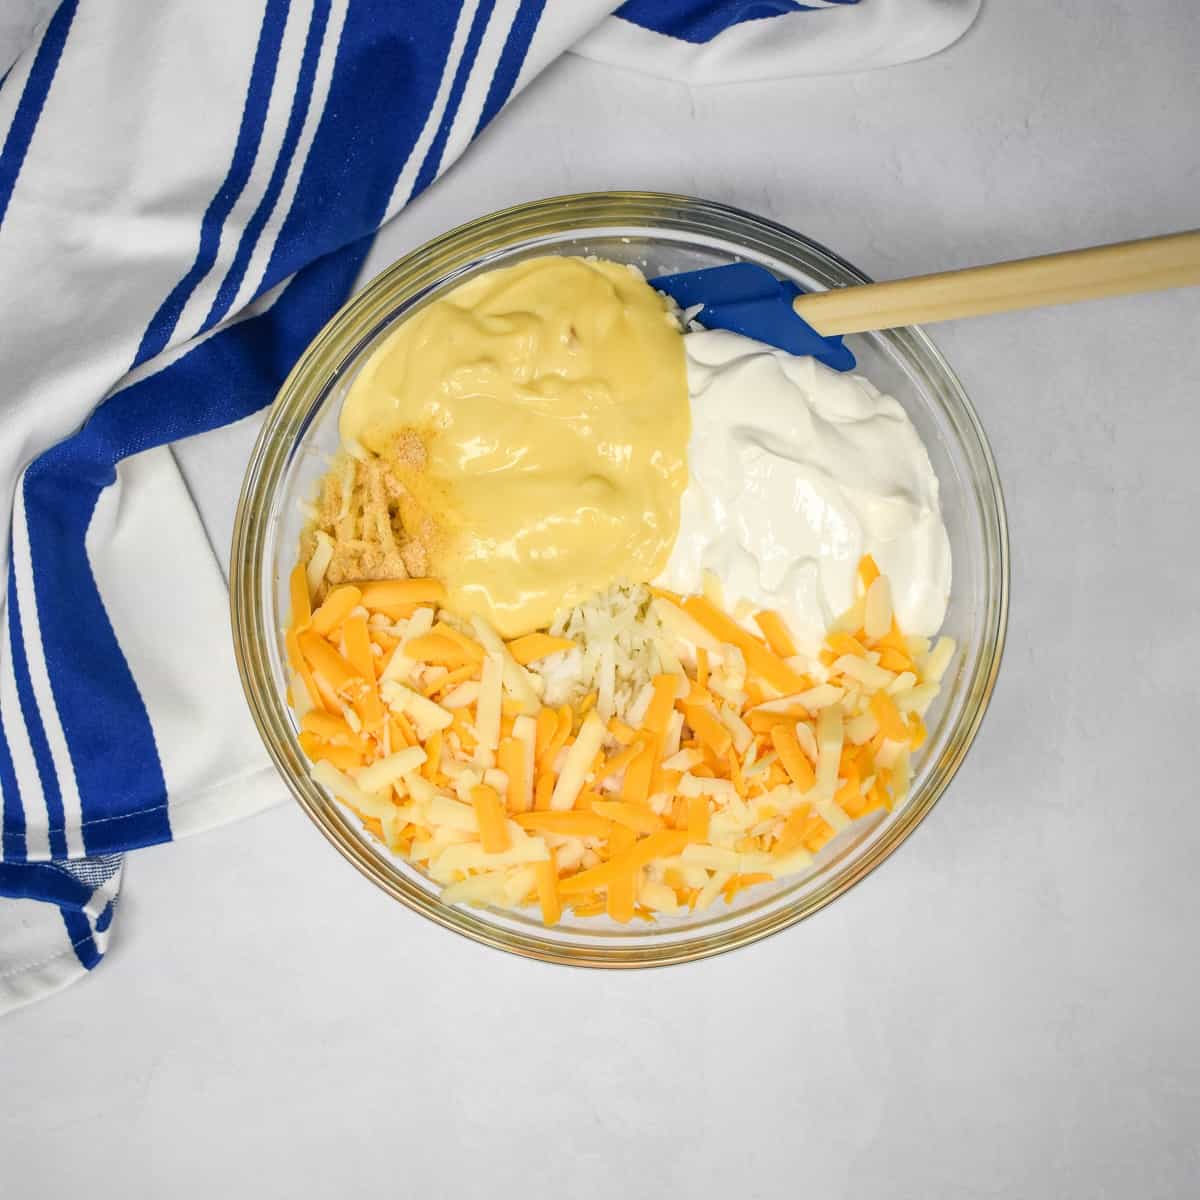 An image of the hash browns, cheese, sour cream, cream of chicken soup and seasoning in a large, glass bowl set on a white table with a blue and white striped kitchen towel.